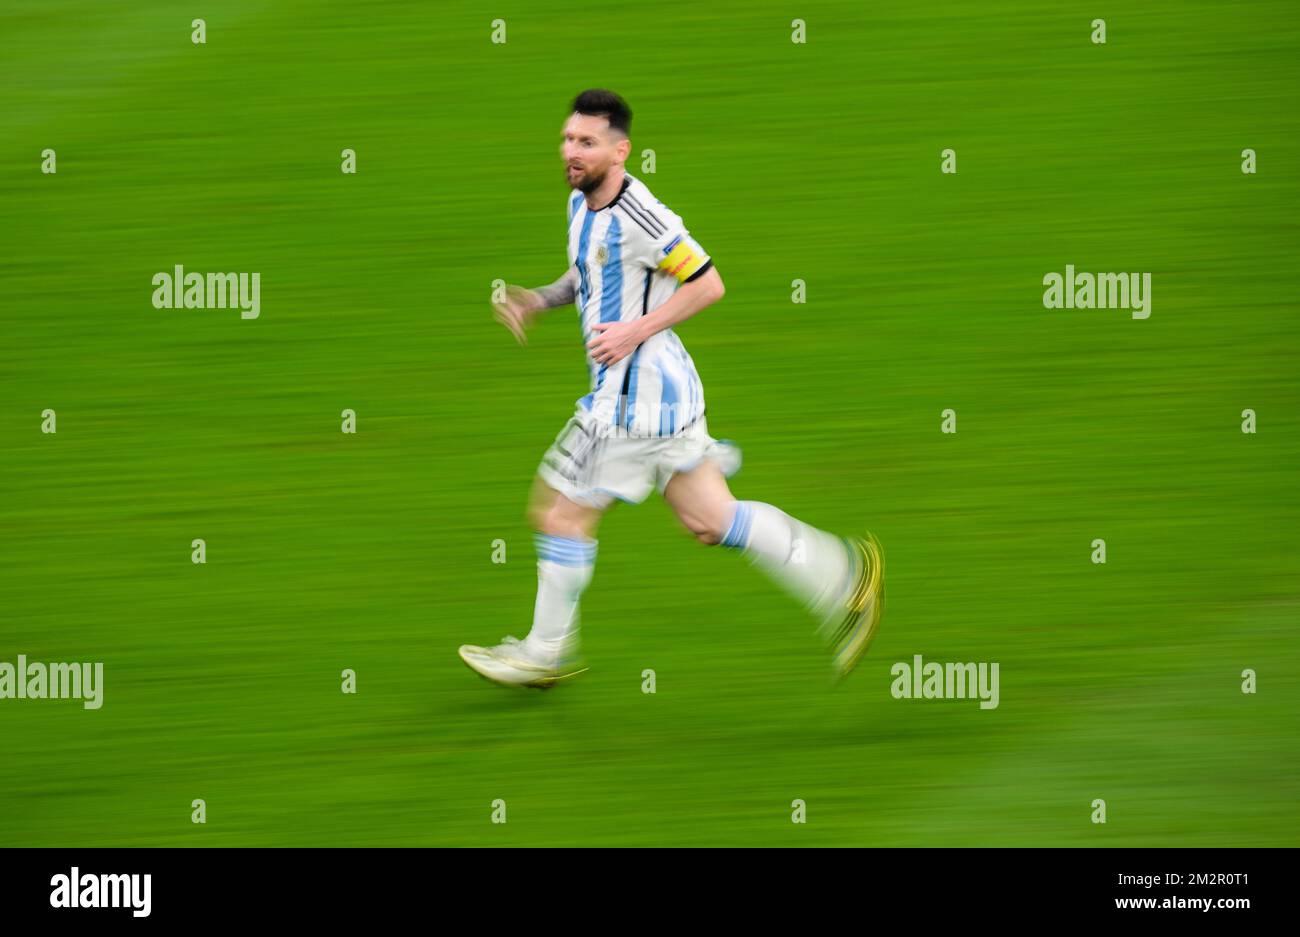 Lusail, Qatar. 13th Dec, 2022. Soccer, World Cup, Argentina - Croatia, final round, semi-final, Lusail Stadium, the stadium before the match. Argentina's Lionel Messi runs across the field. (shot with long exposure time) Credit: Robert Michael/dpa - IMPORTANT NOTE: In accordance with the requirements of the DFL Deutsche Fußball Liga and the DFB Deutscher Fußball-Bund, it is prohibited to use or have used photographs taken in the stadium and/or of the match in the form of sequence pictures and/or video-like photo series./dpa/Alamy Live News Stock Photo